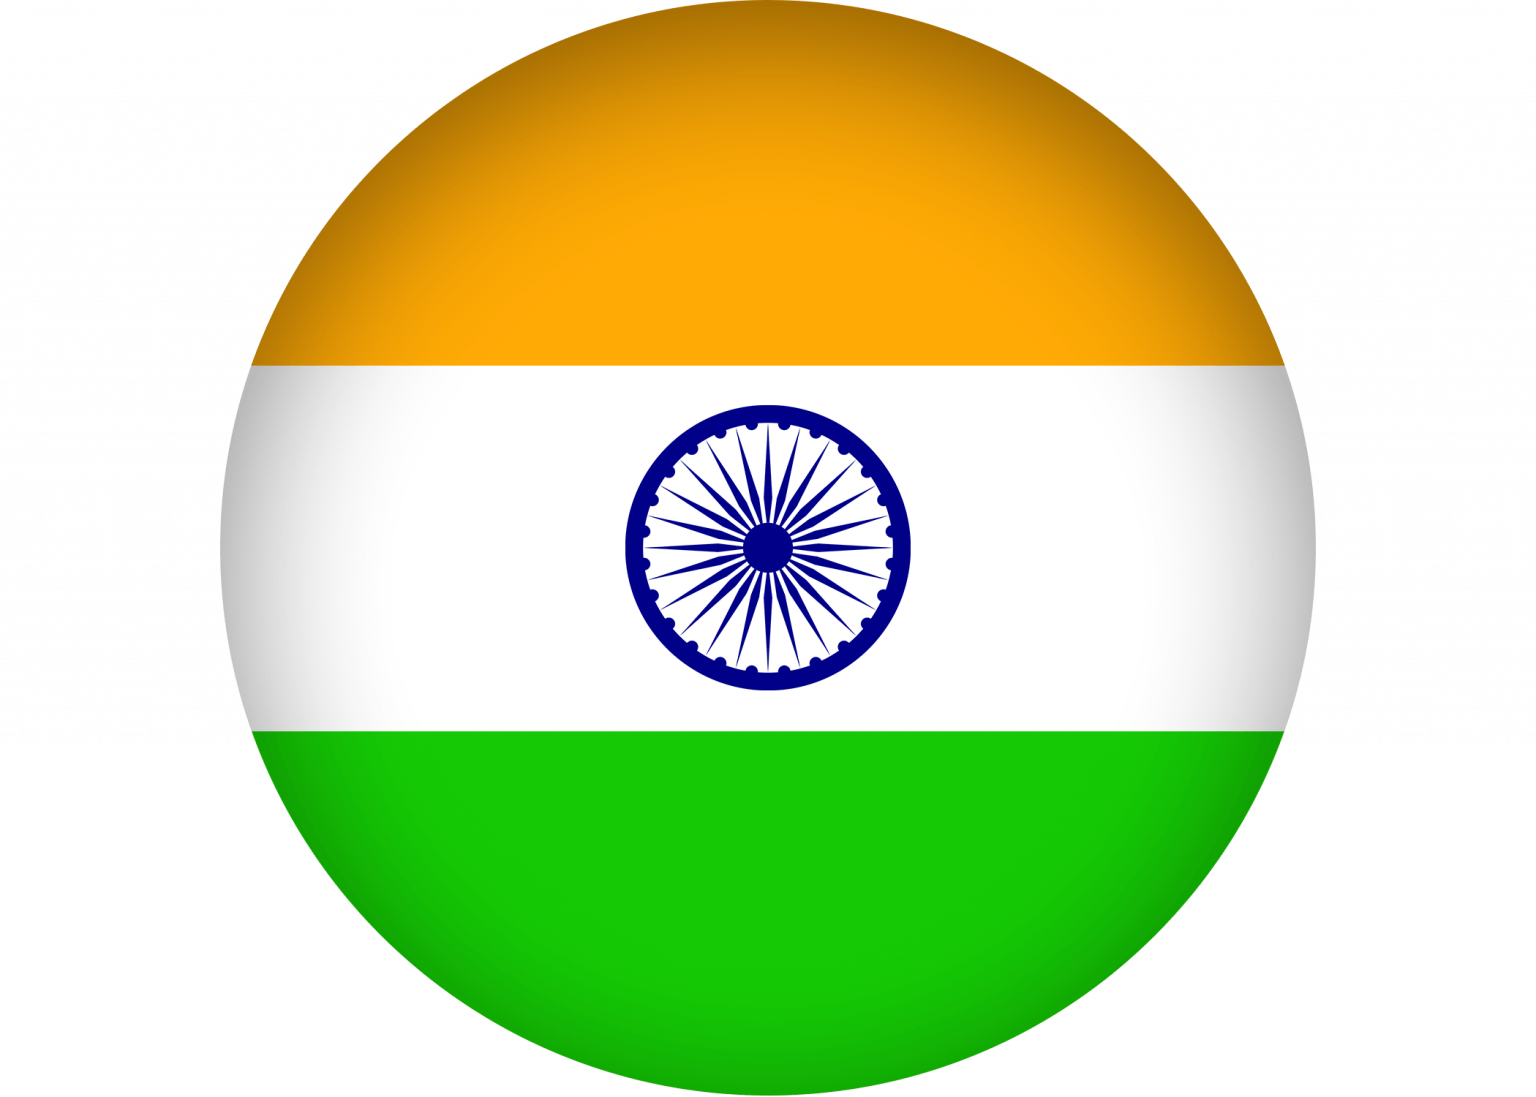 Indian Flag Circle In The Middle